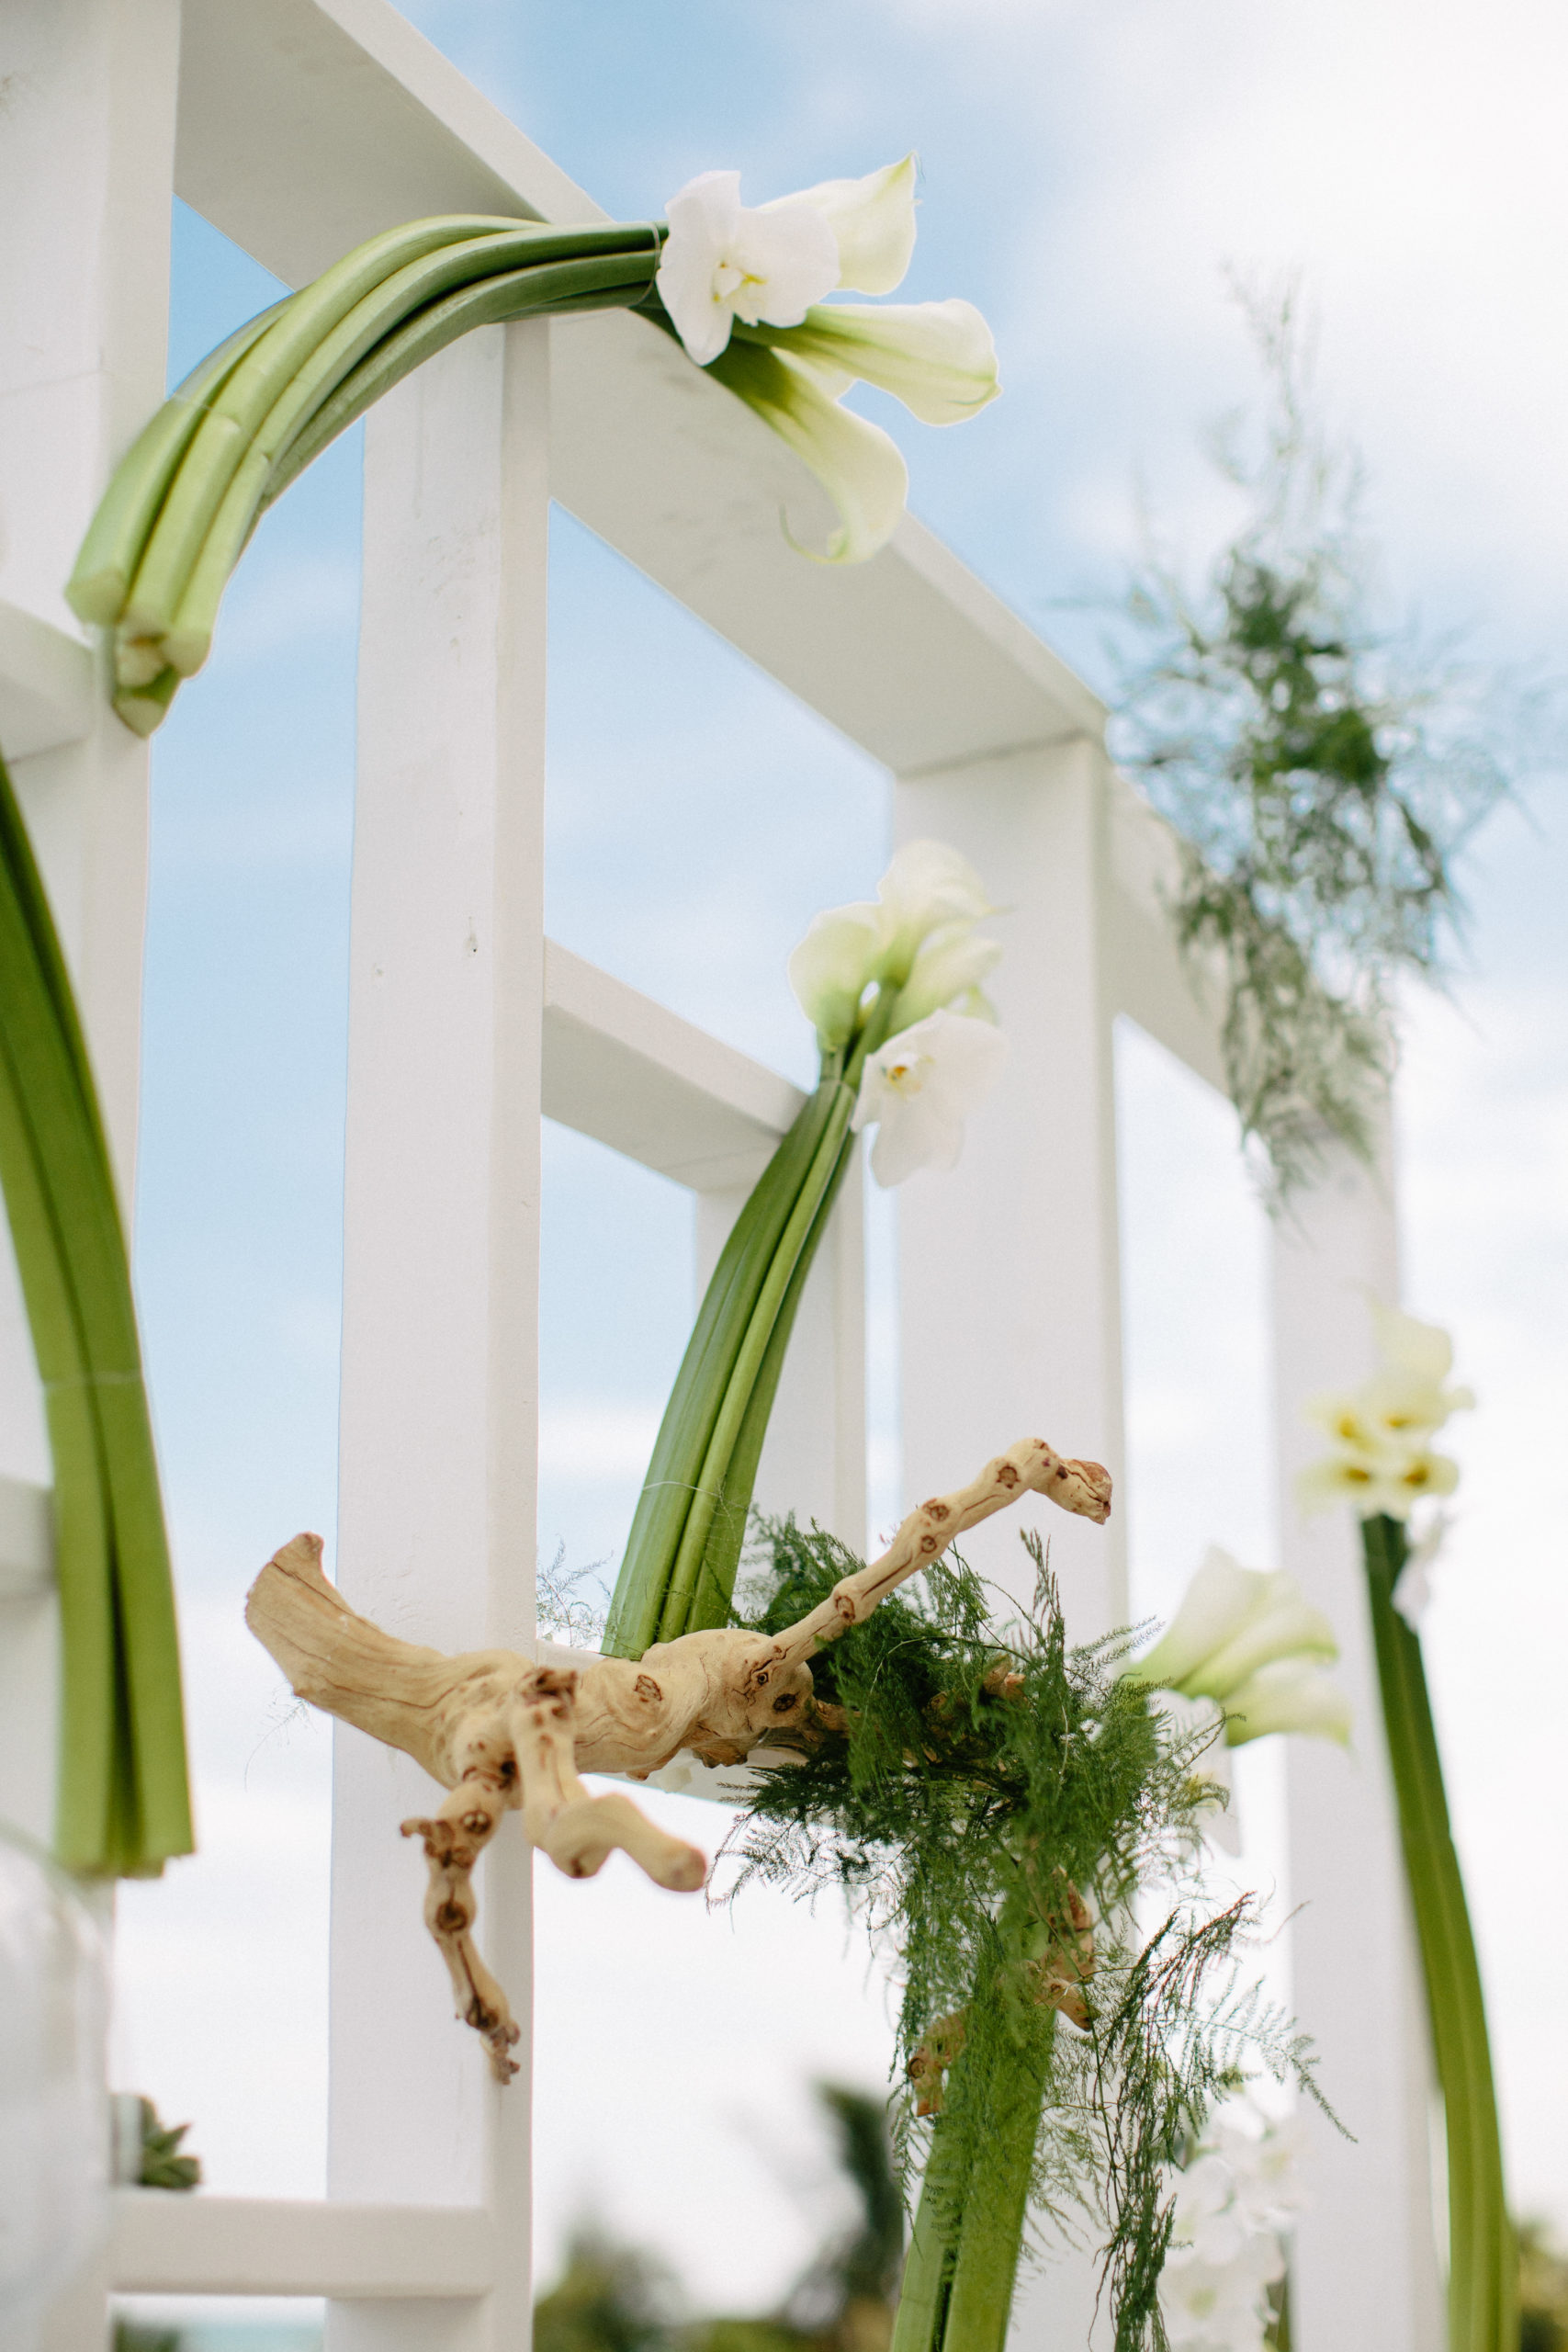 A Unique ceremony setup placed guest chairs around the couple to form an open circle encasing the couple and showcasing the custom ceremony structure with calla lilies, orchids, and greenery